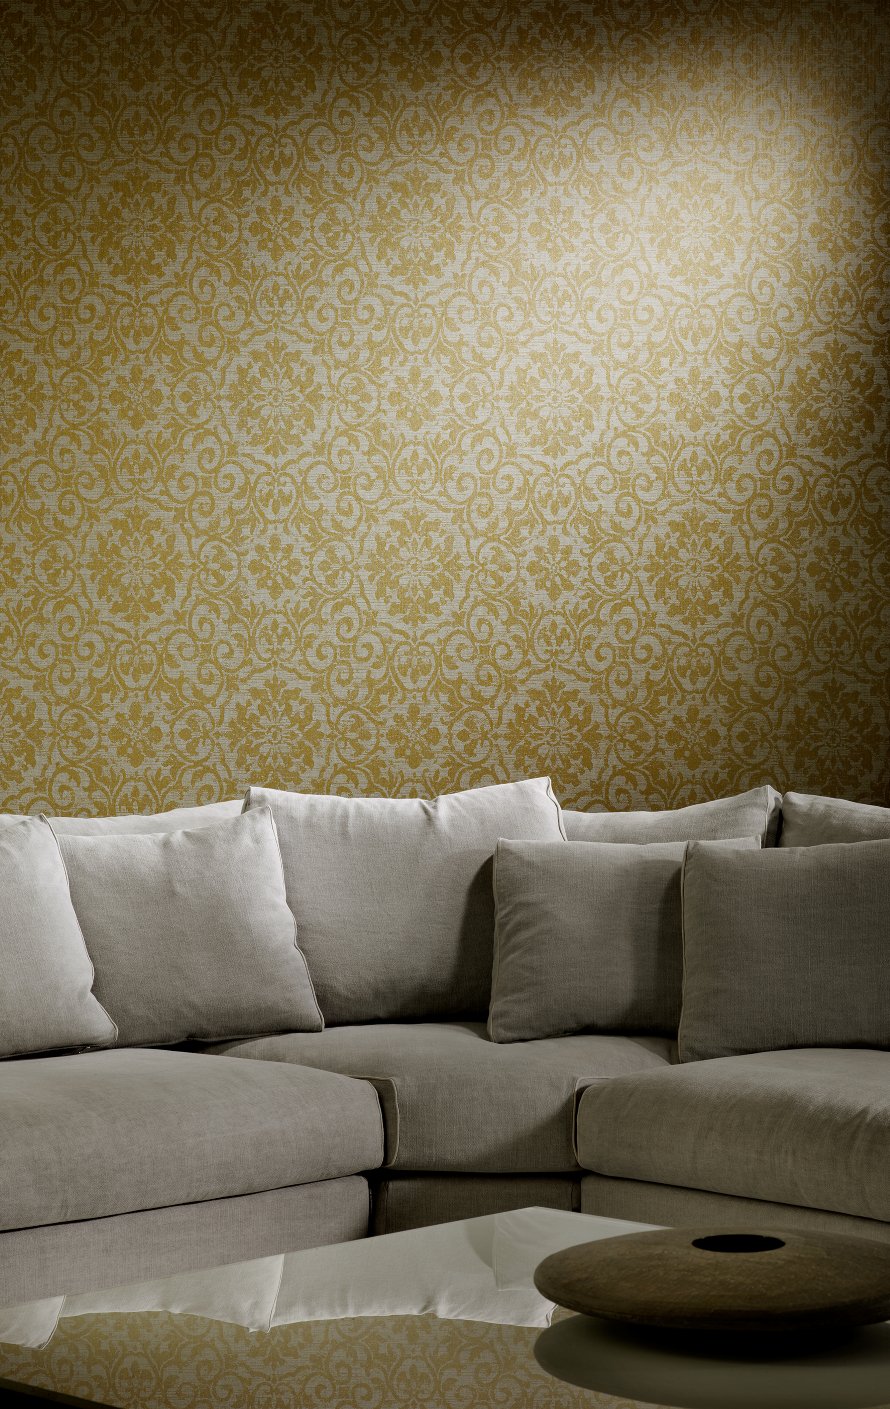 Favourite Twist - Sofa Bed , HD Wallpaper & Backgrounds